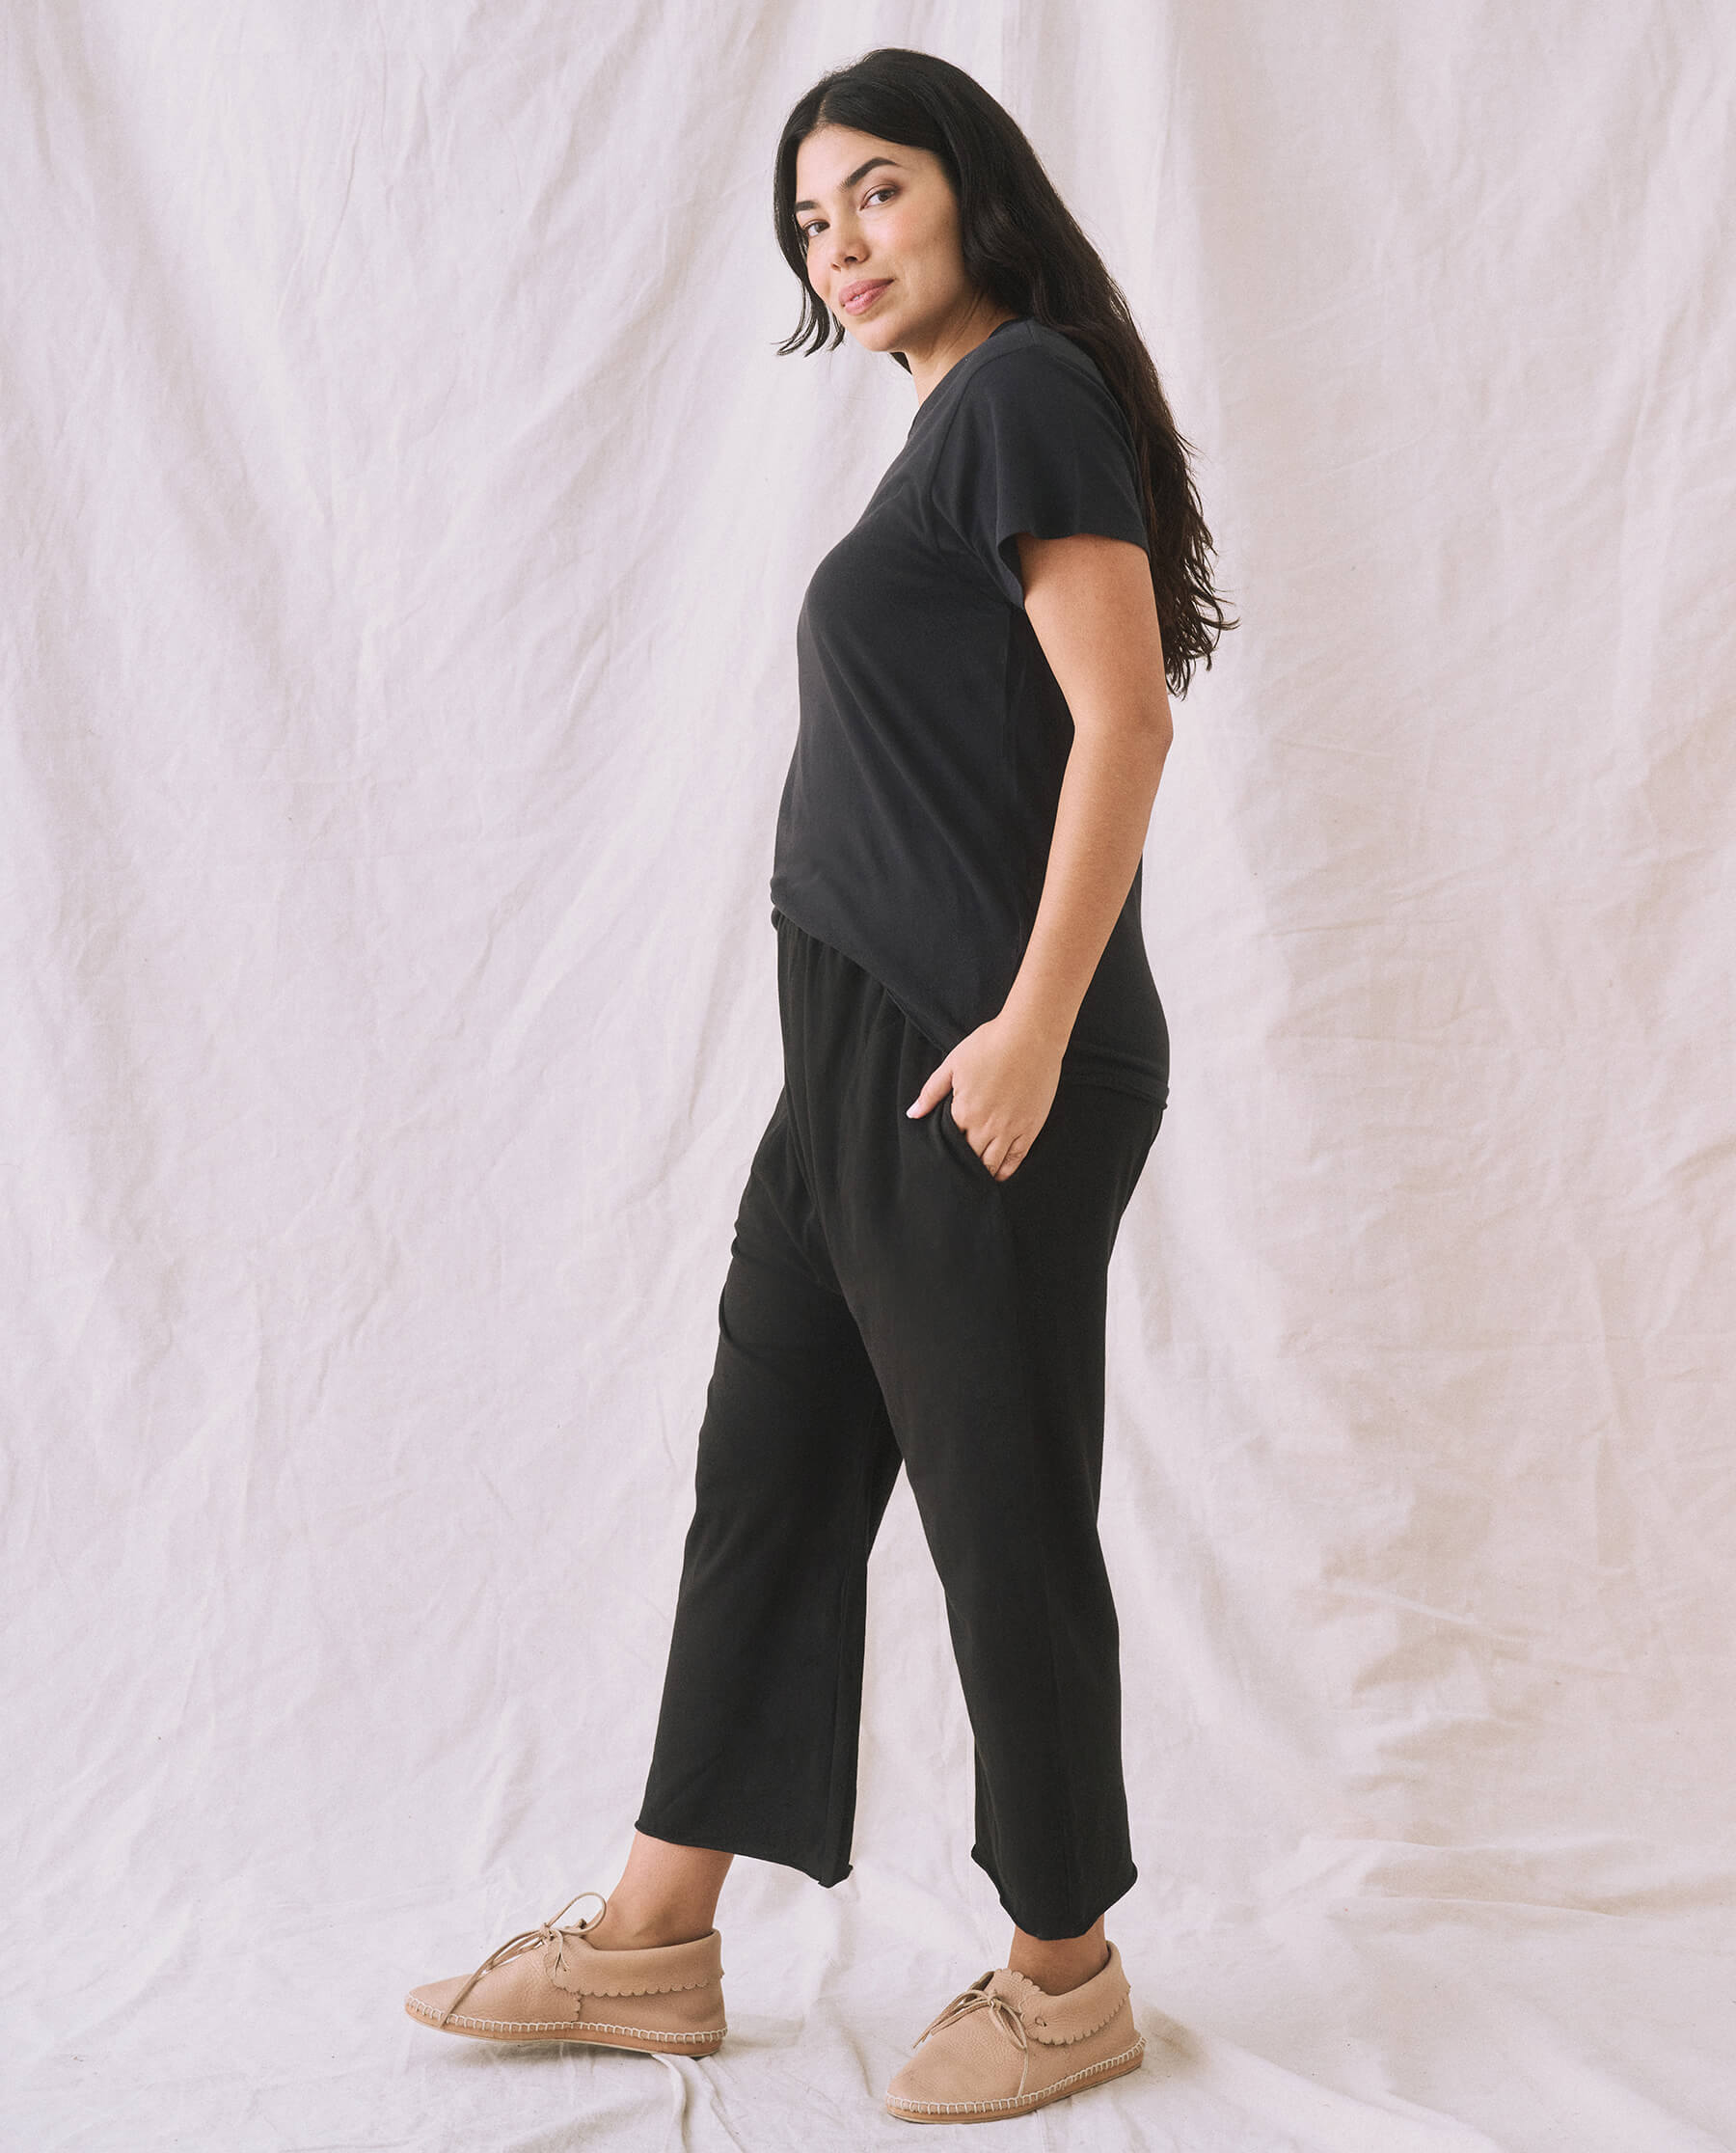 The Jersey Crop. -- Almost Black SWEATPANTS THE GREAT. CORE KNITS